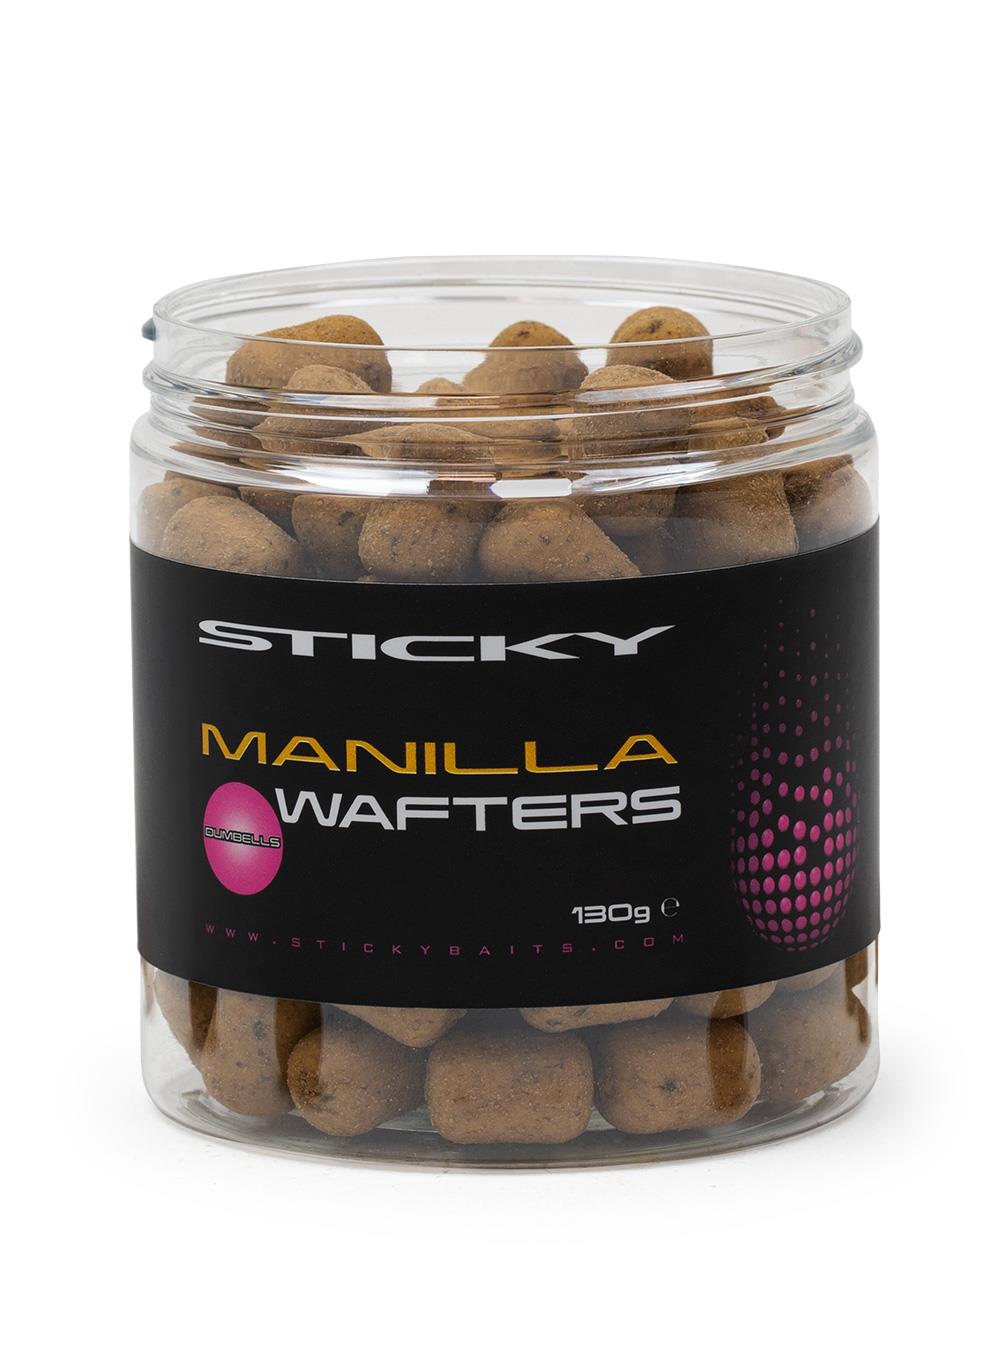 Sticky Baits Manilla Wafter Dumbells